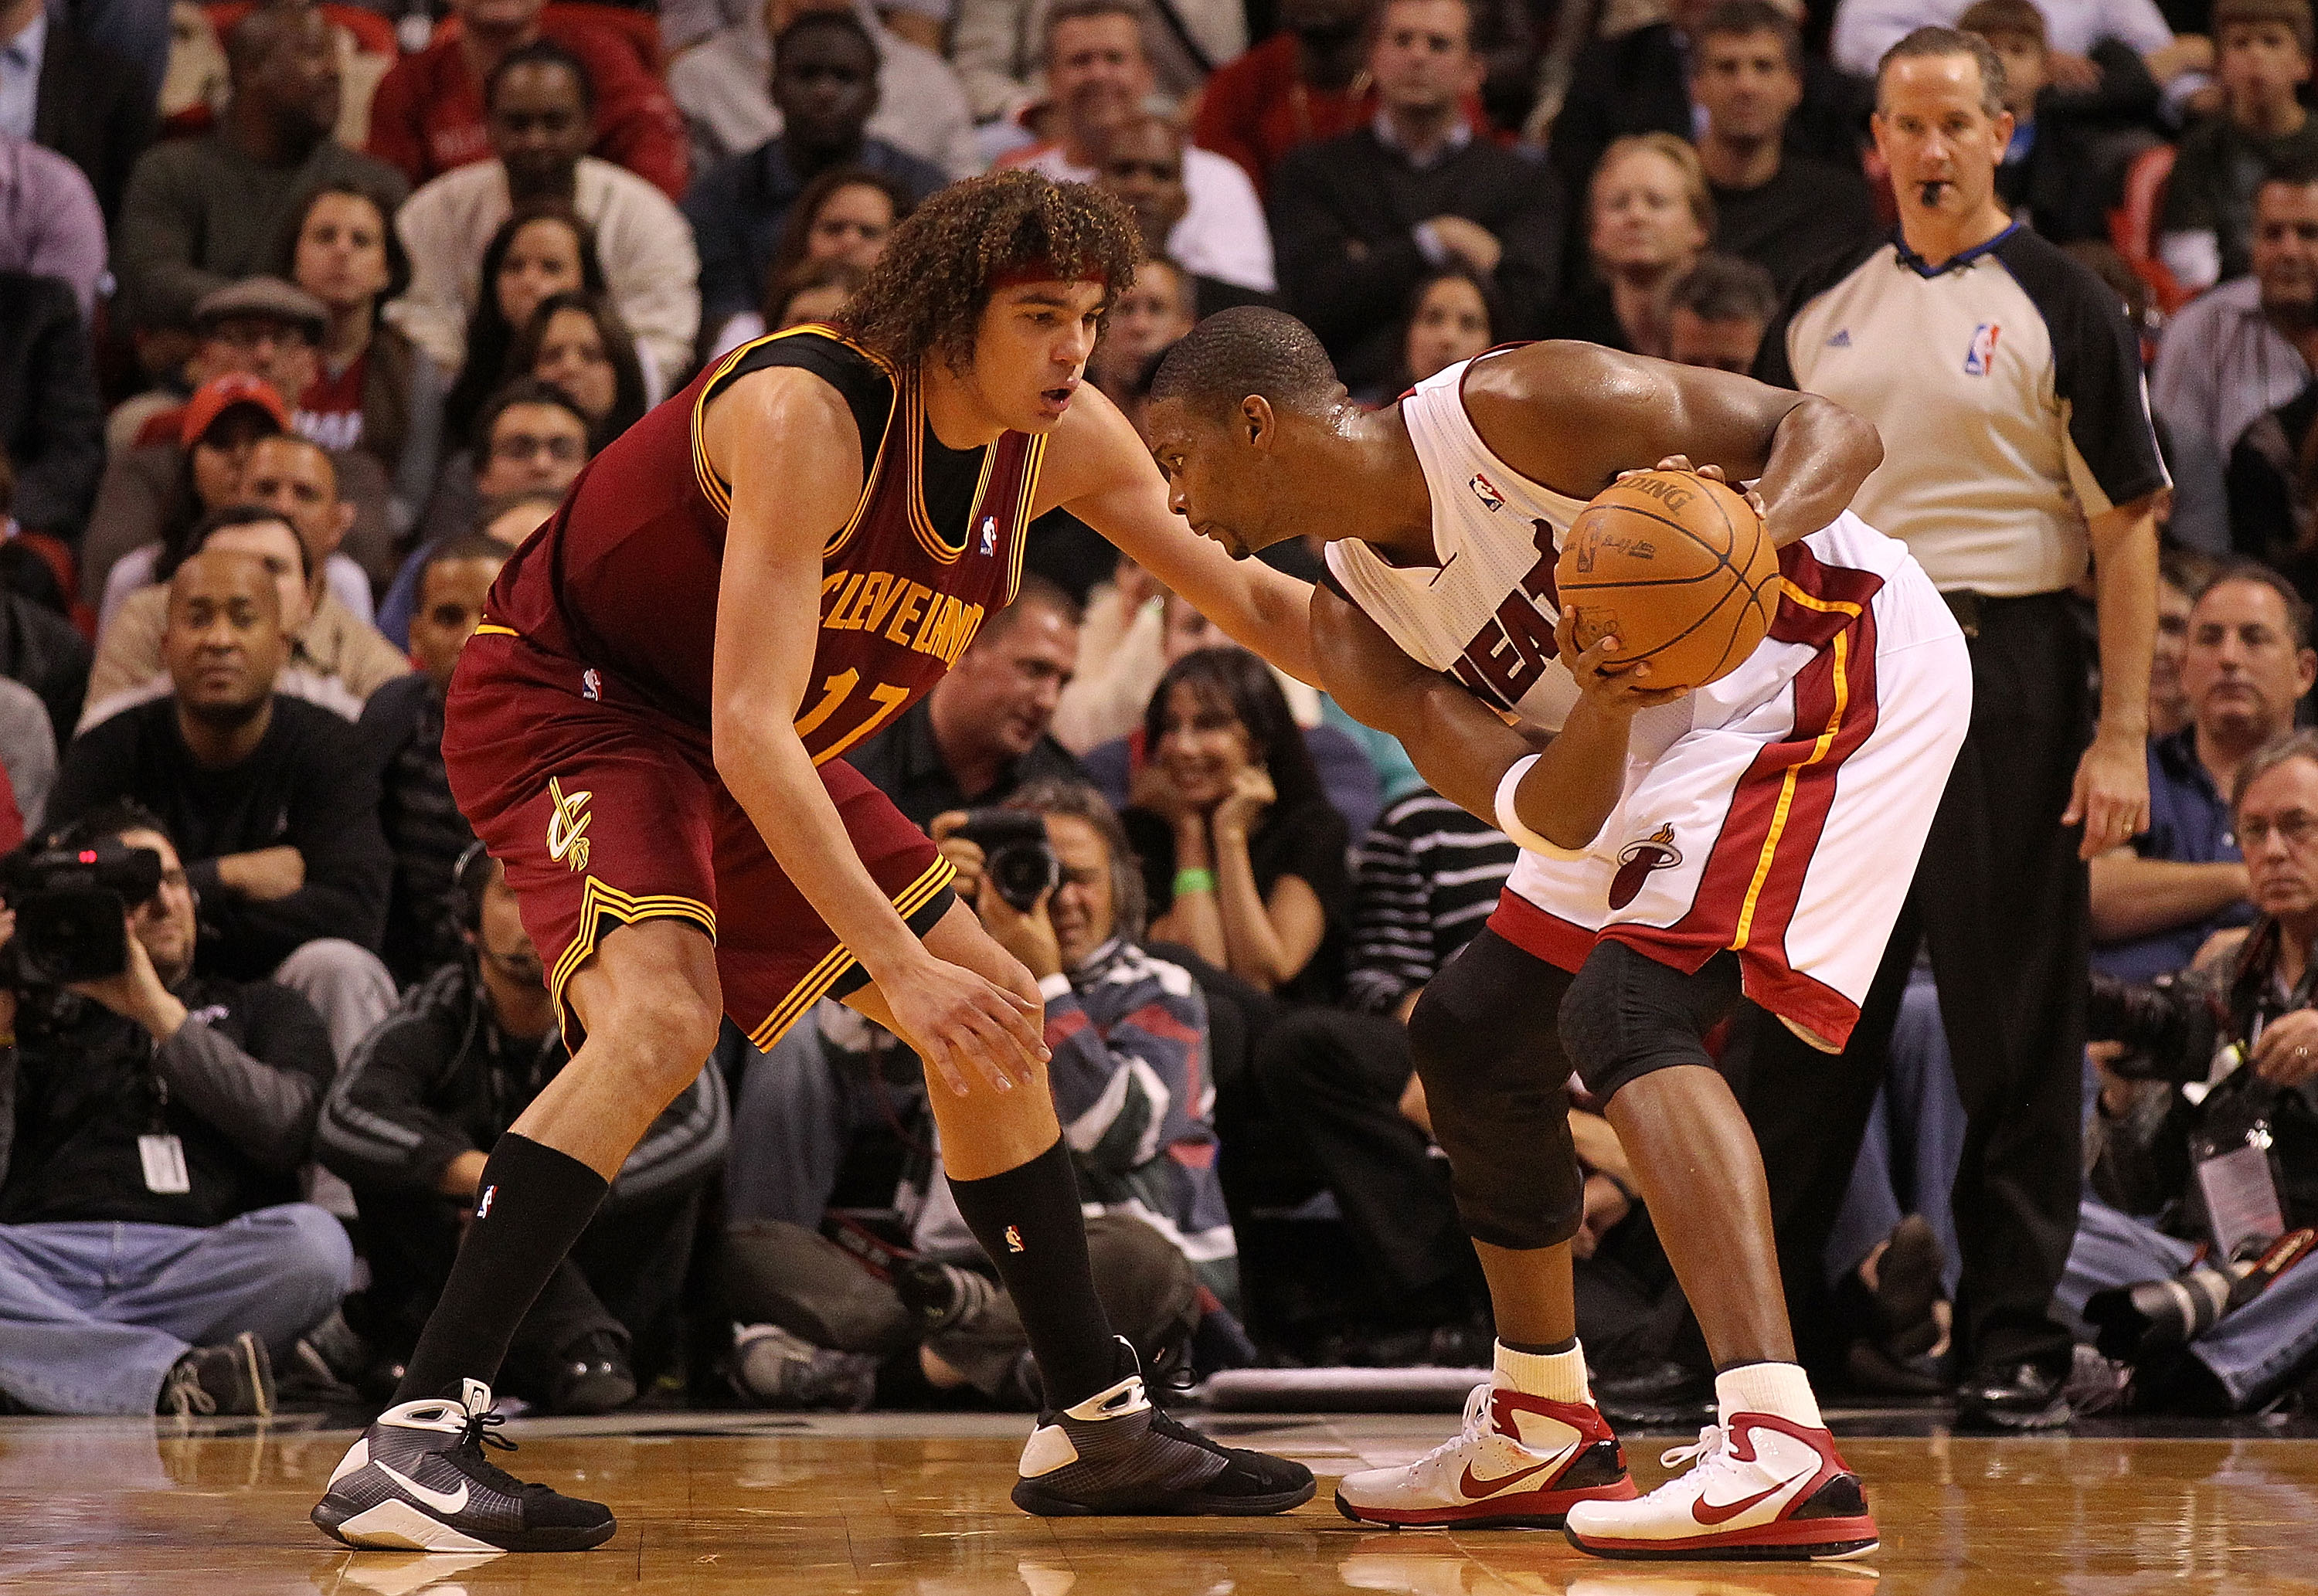 MIAMI, FL - DECEMBER 15: Chris Bosh #1 of the Miami Heat posts up Anderson Varejao #17 of the Cleveland Cavaliers during a game at American Airlines Arena on December 15, 2010 in Miami, Florida. NOTE TO USER: User expressly acknowledges and agrees that, b